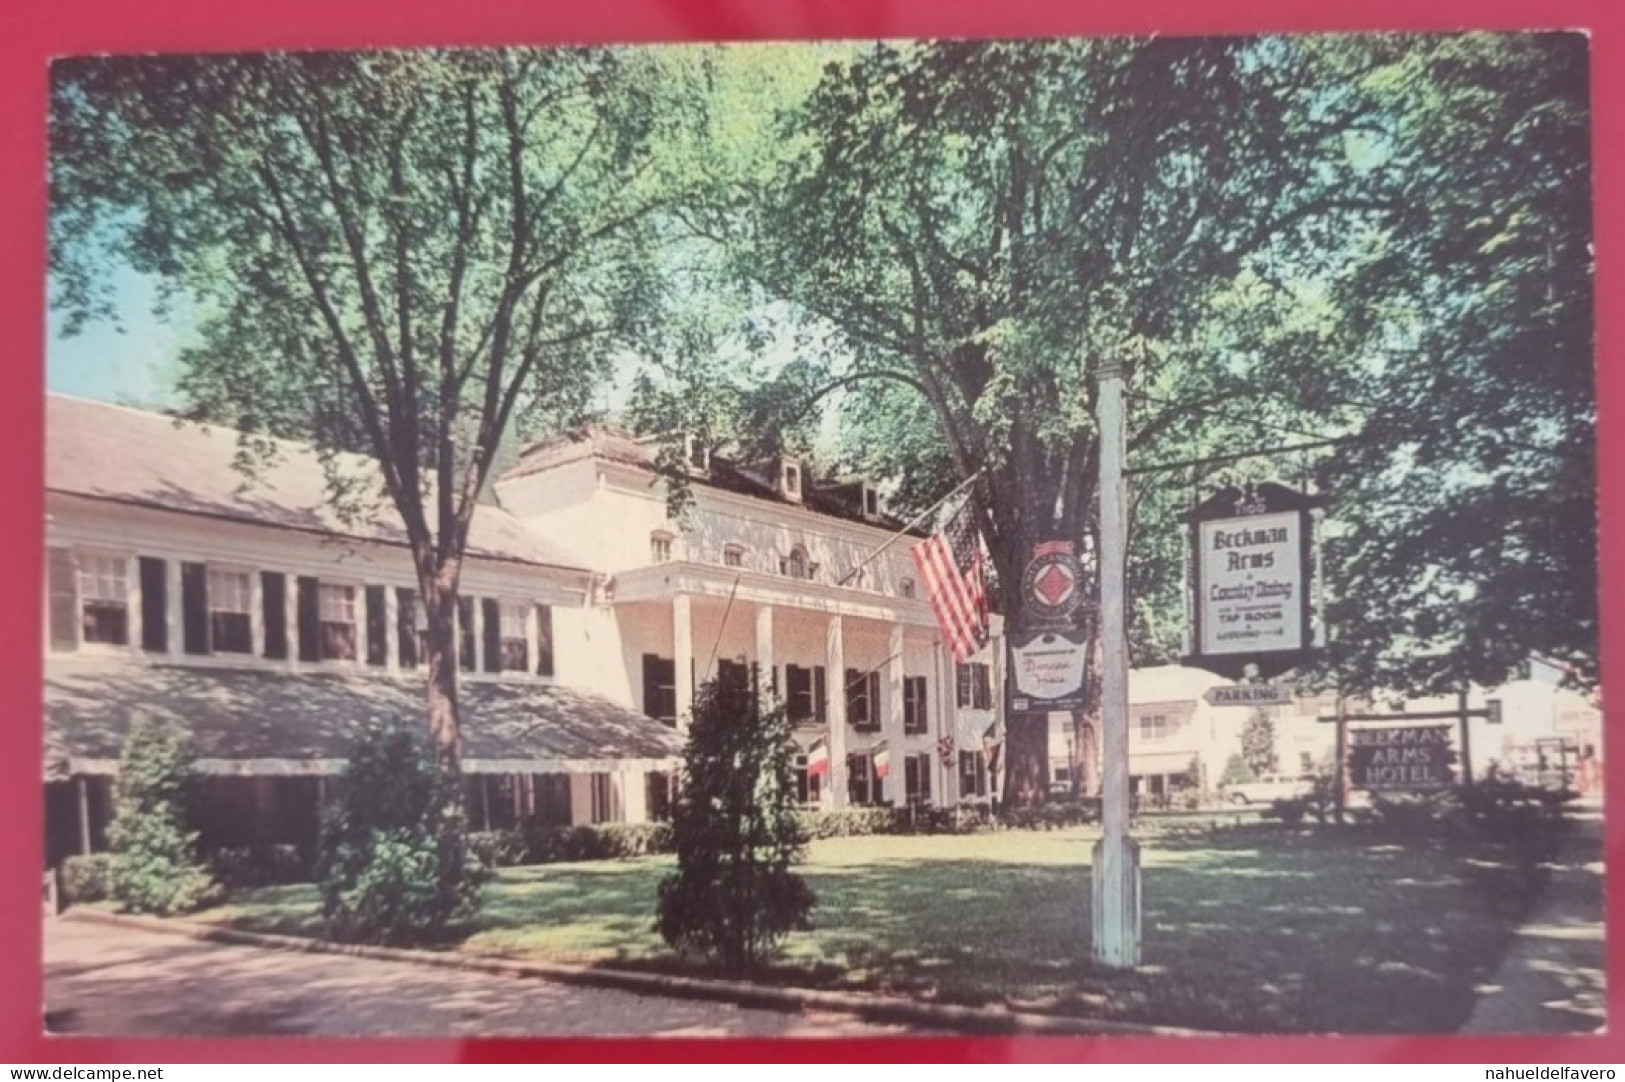 Uncirculated Postcard - USA - NY, NEW YORK - BEEKMAN ARMS, OLDEST HOTEL IN AMERICA, RHINEBECK - Bares, Hoteles Y Restaurantes